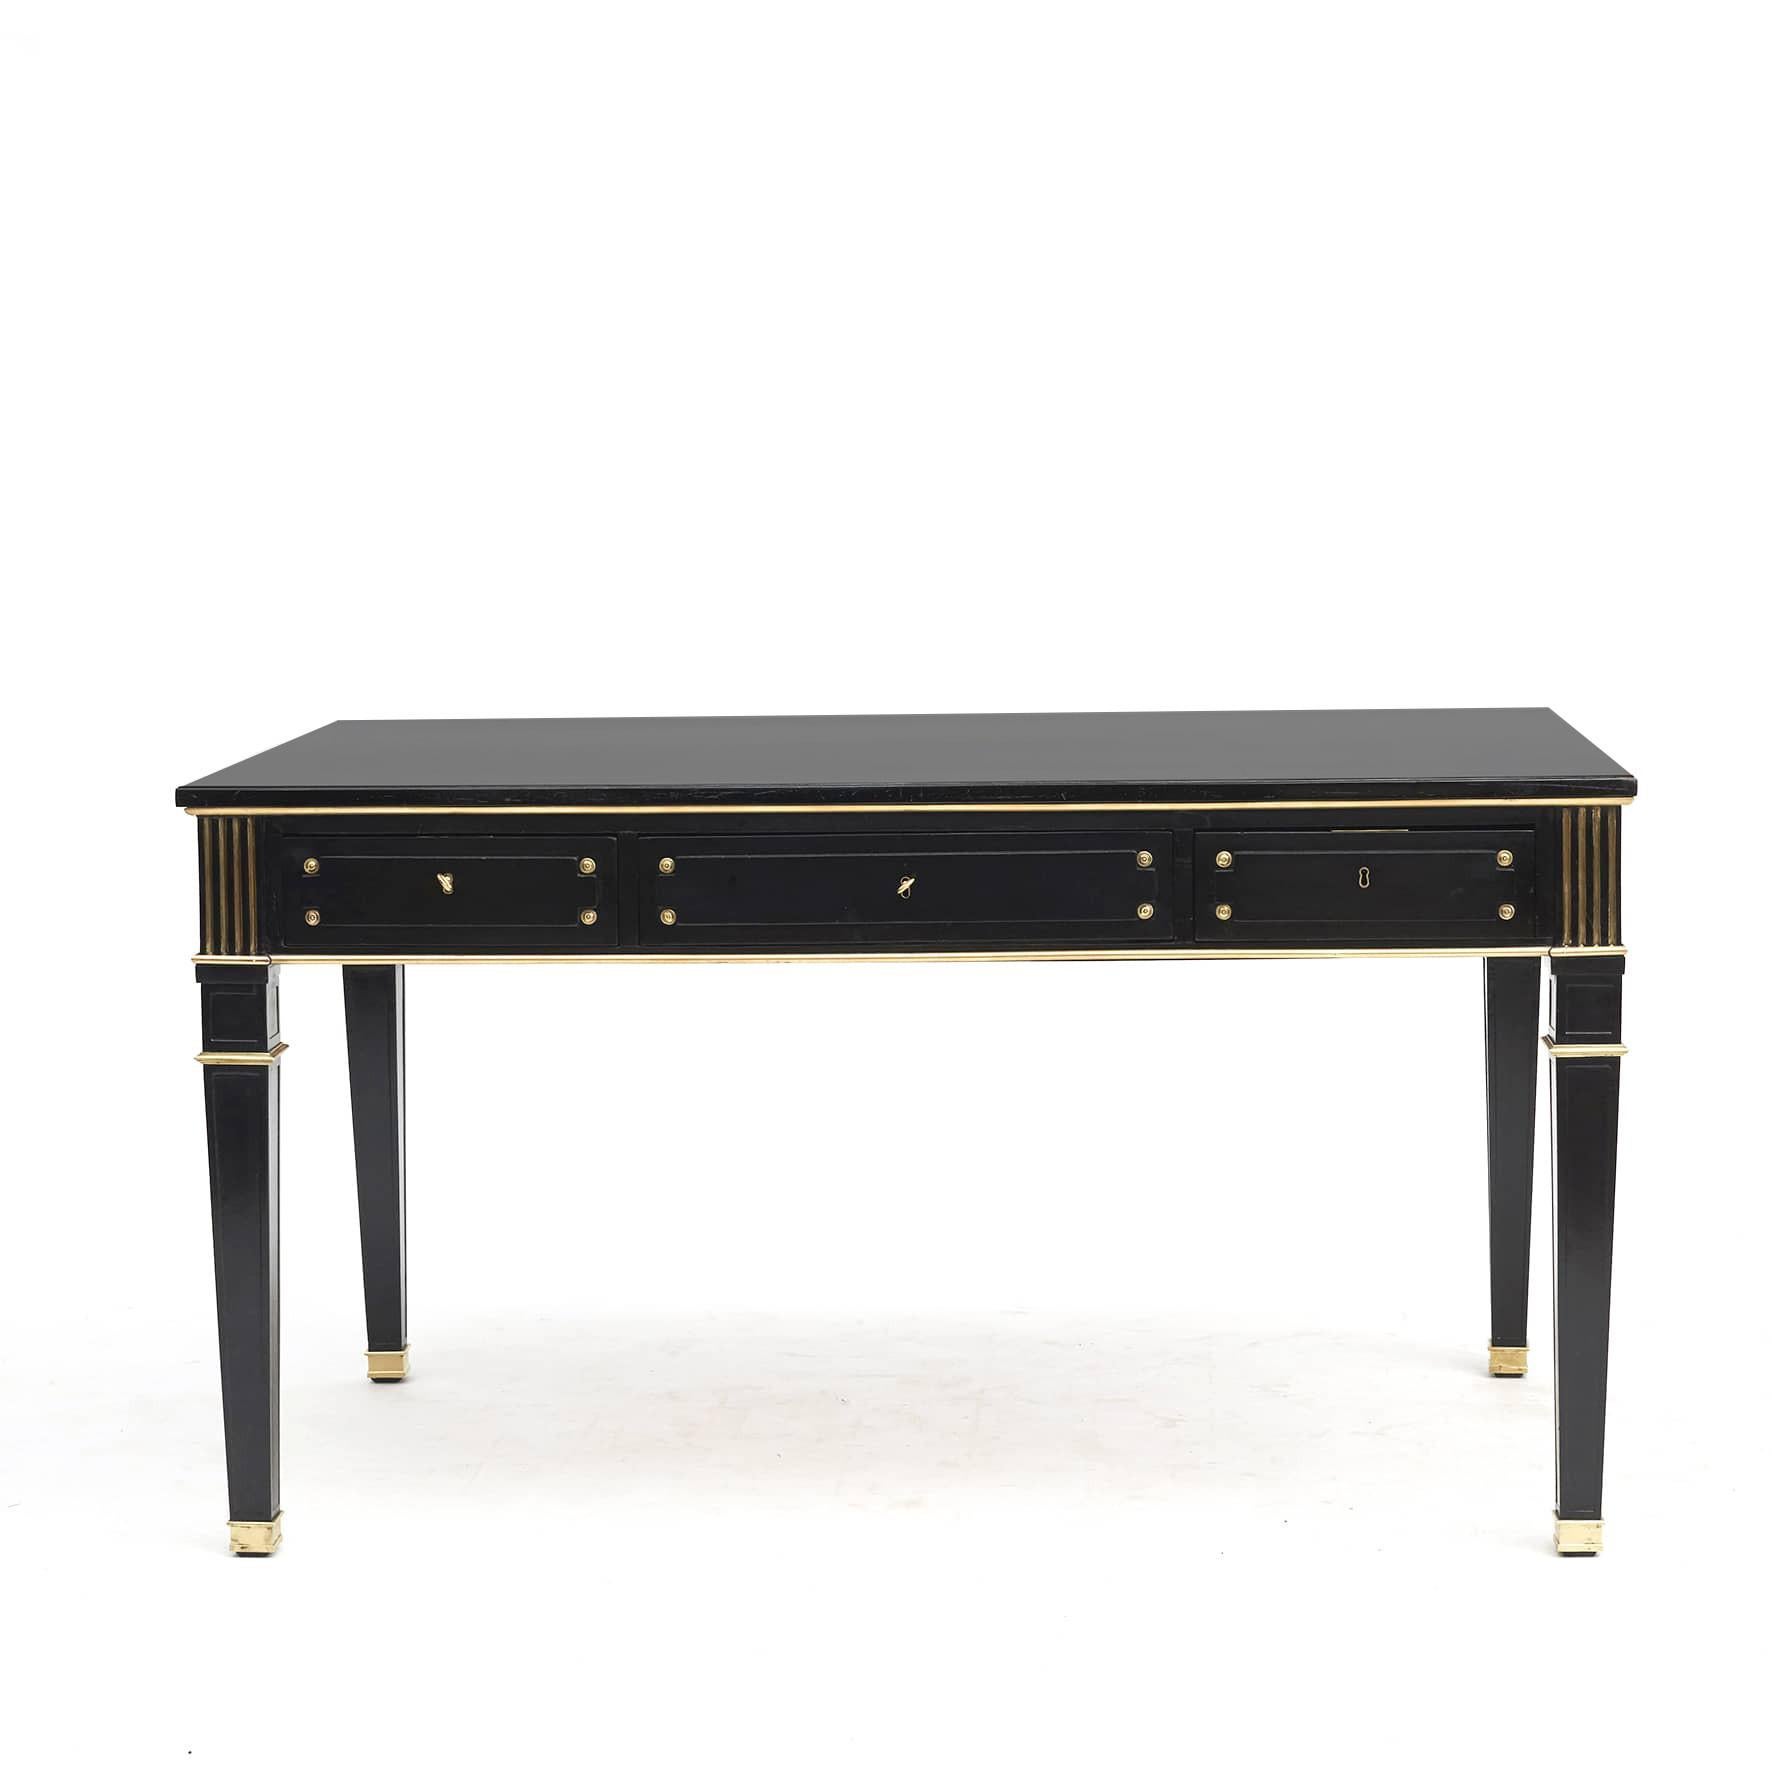 French 1900s 'Directoire Style' or ‘Louis XVI style’ ebonized mahogany desk with gilt bronze trim.
Freestanding with 3 drawers in the front and 3 faux drawers on the back, decorated with bronze rosettes. Fluted bronze decorations on the